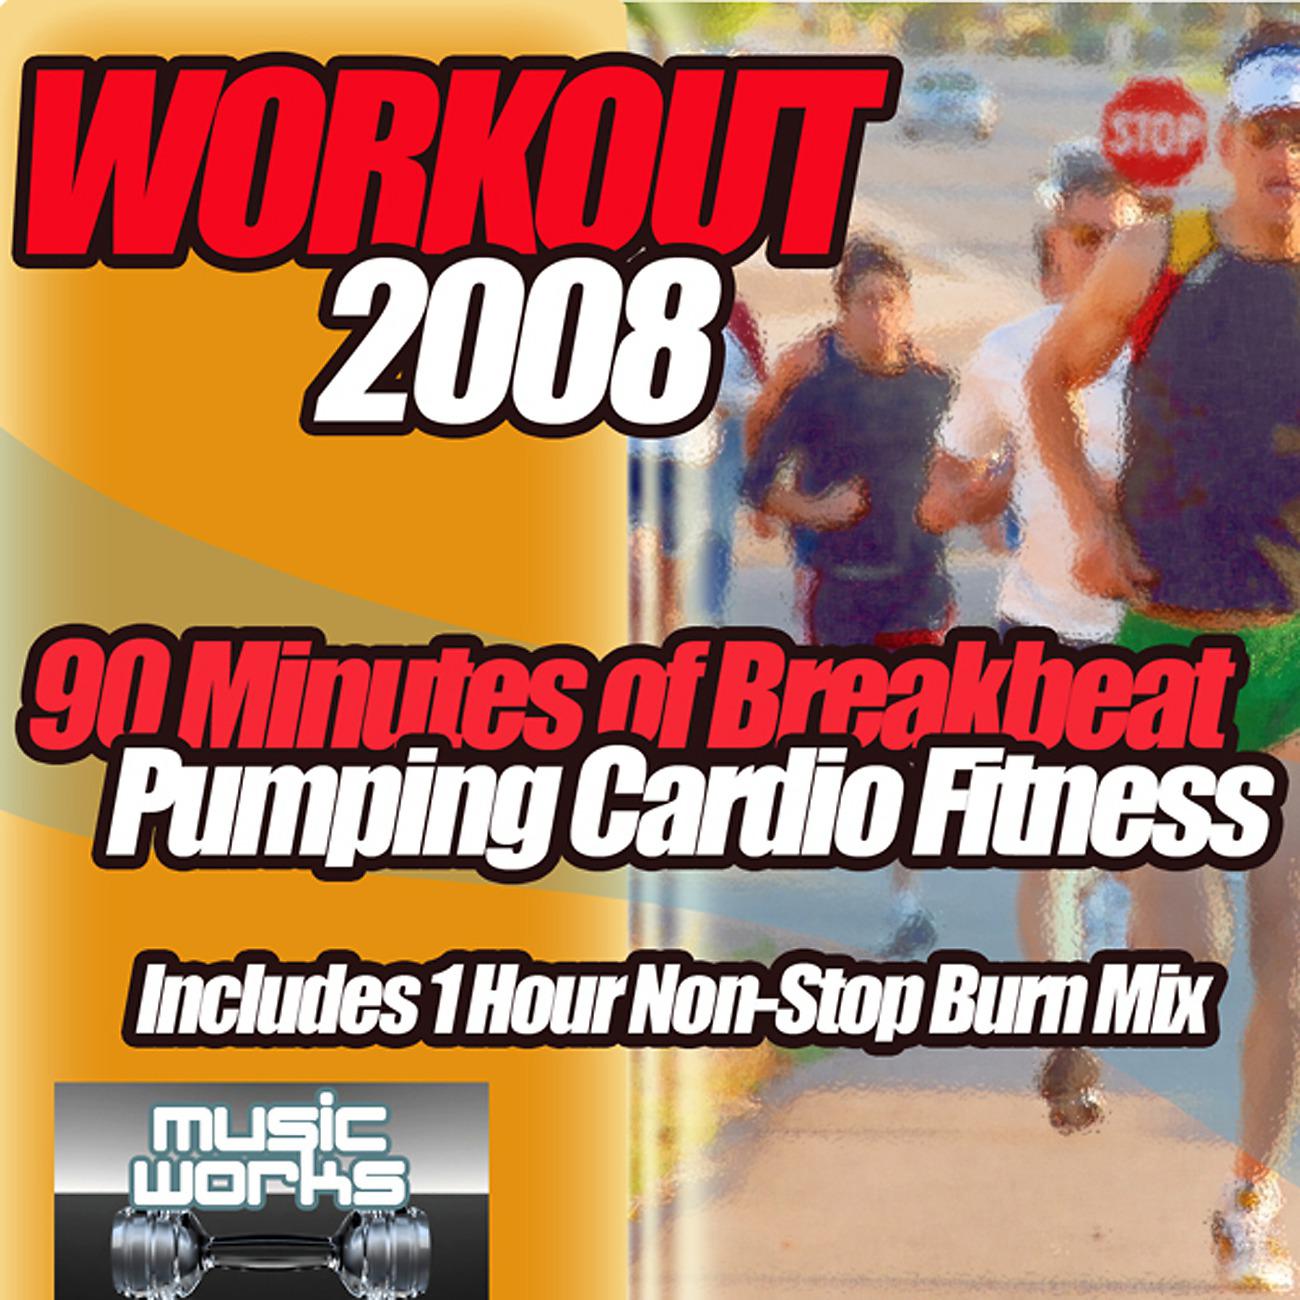 Постер альбома Workout 2008 - 90 Minutes of Breakbeat Pumping Cardio Fitness